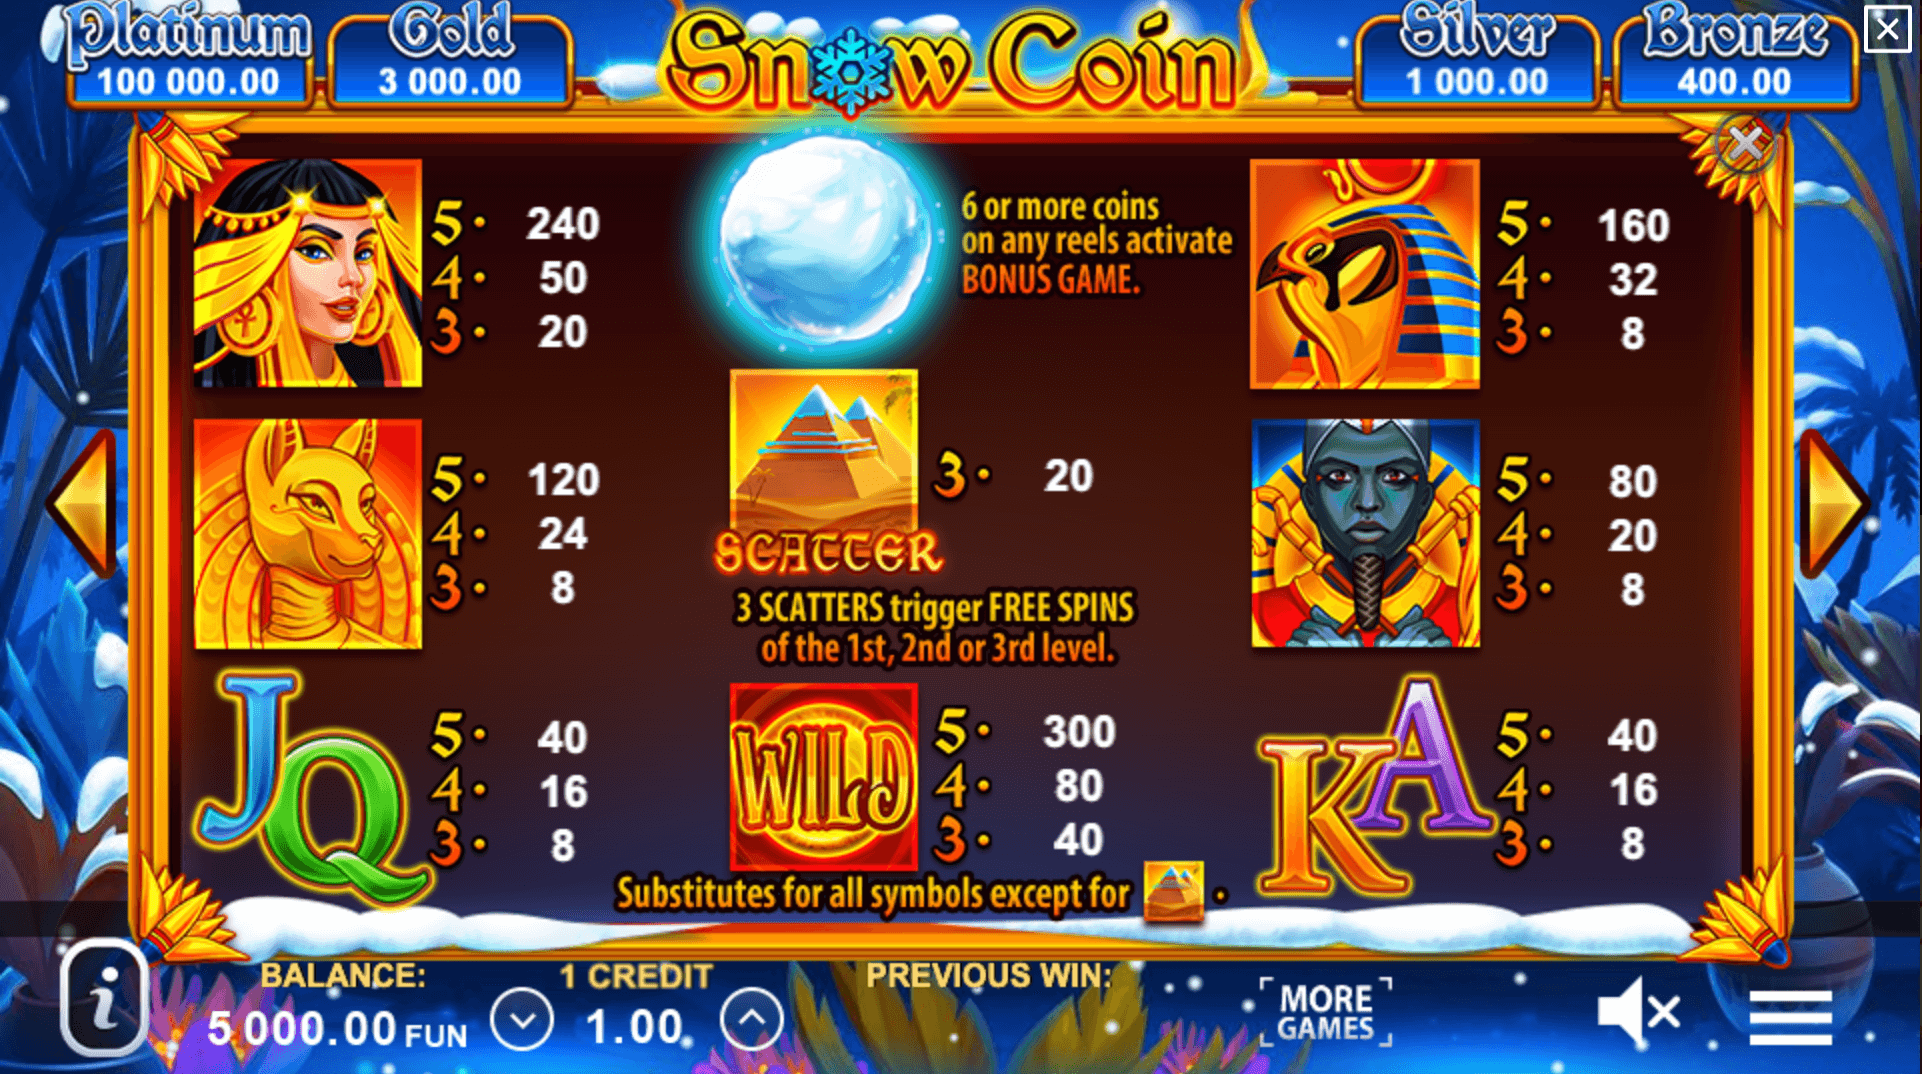 Snow Coin: Hold The Spin Игровой процесс